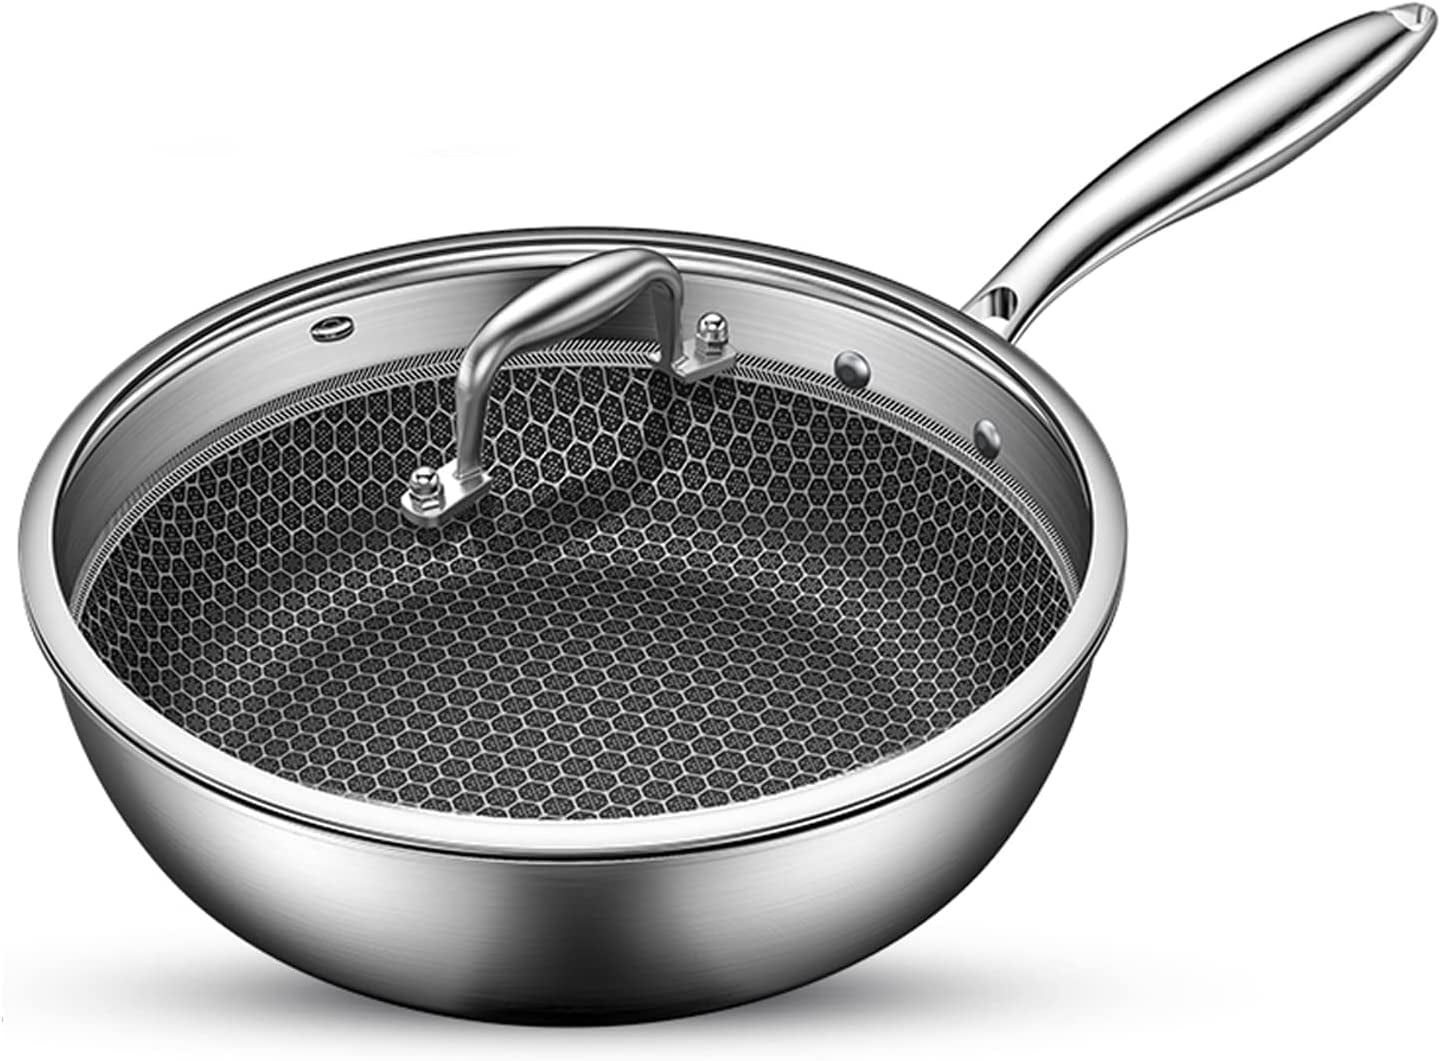 Potinv Hybrid Stainless Steel Wok with Stay Cool Handles 12 Inch,Non-Stick,  Dishwasher and Oven Safe, Works with Induction, Ceramic, Electric, and Gas